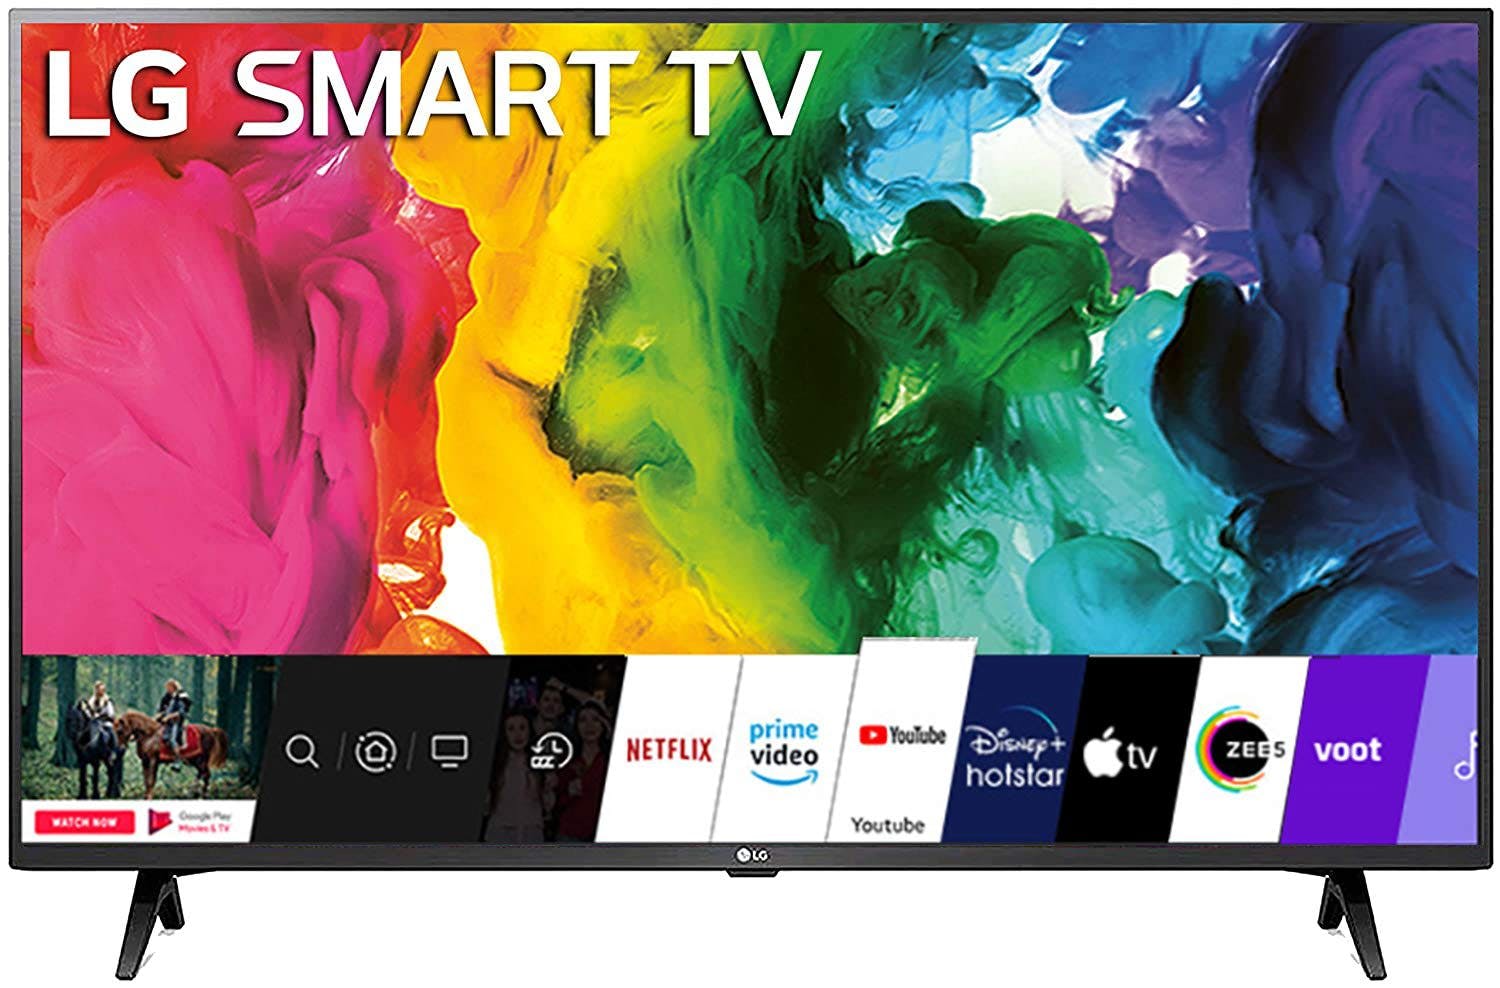 LG 143 inches Full HD LED Smart TV at Rs 28,990 only